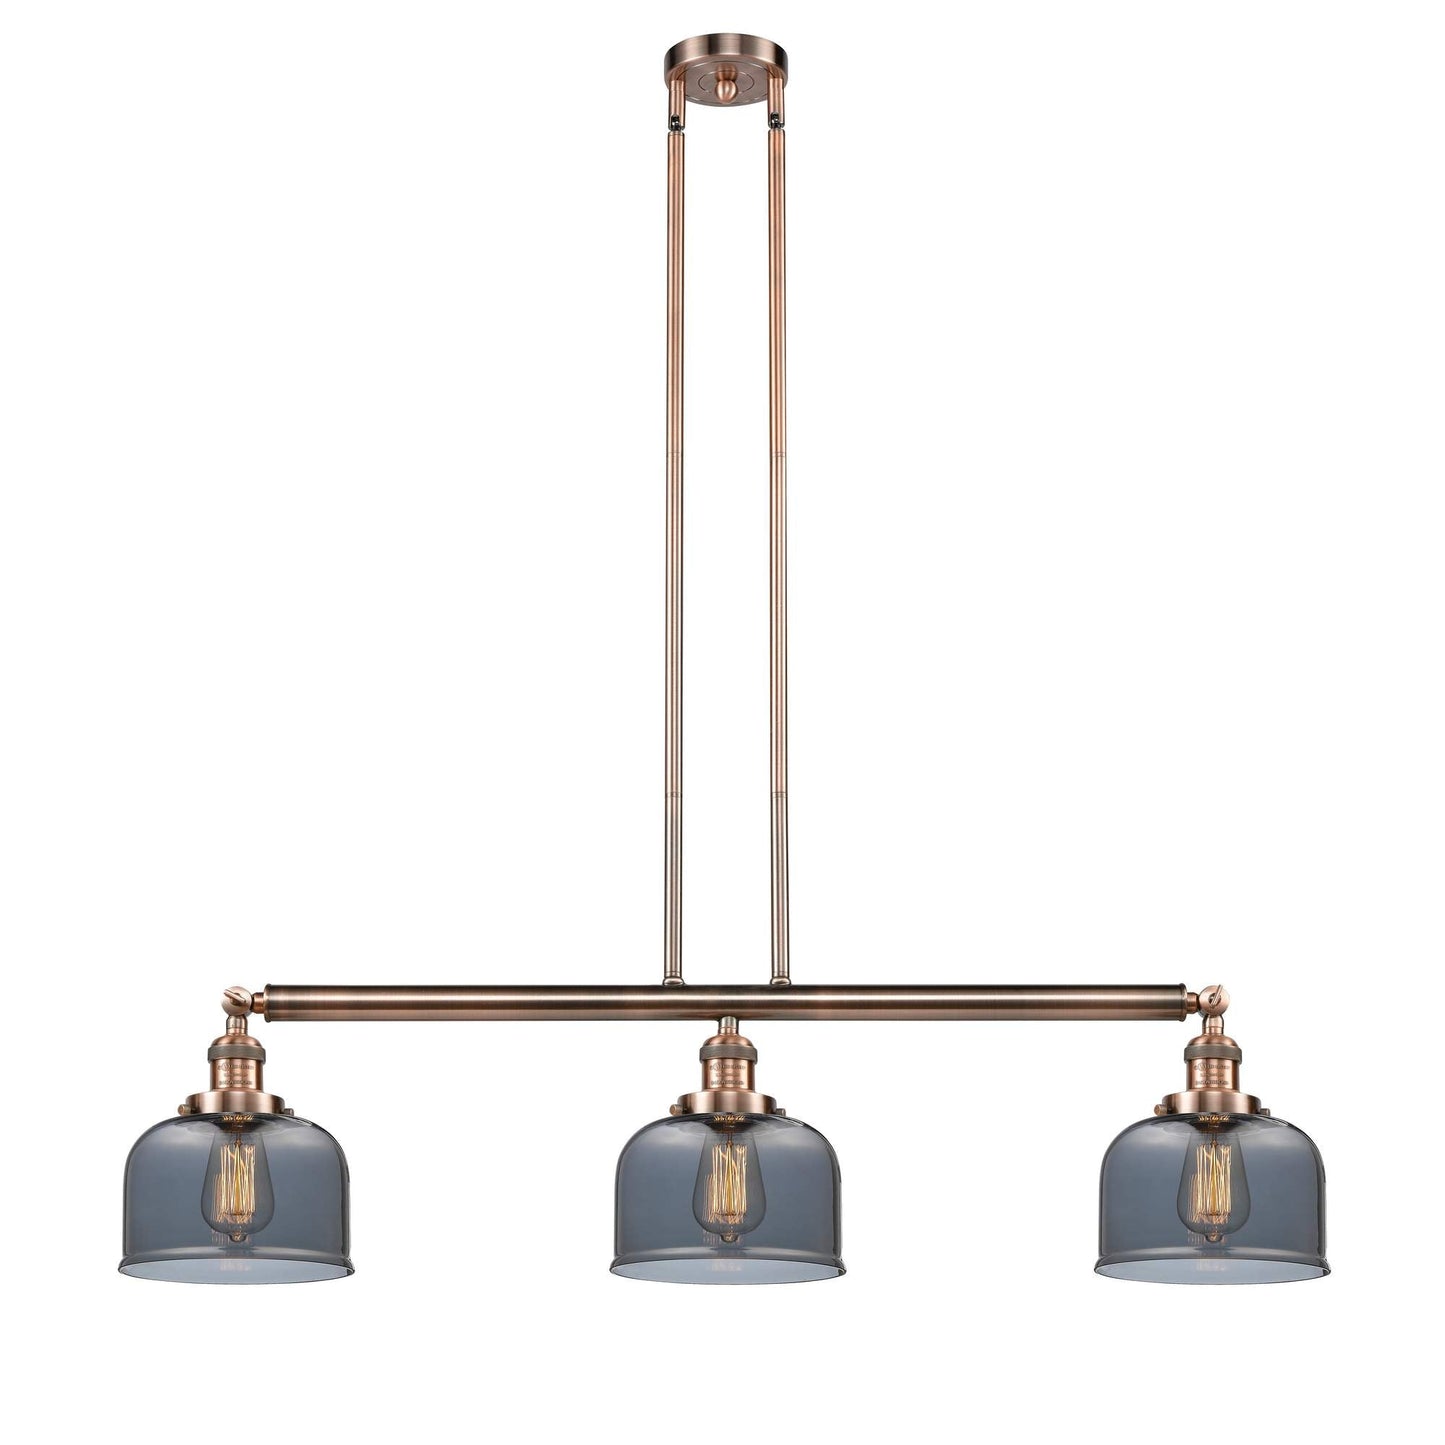 213-AC-G73 3-Light 40.5" Antique Copper Island Light - Plated Smoke Large Bell Glass - LED Bulb - Dimmensions: 40.5 x 8 x 13<br>Minimum Height : 20<br>Maximum Height : 44 - Sloped Ceiling Compatible: Yes